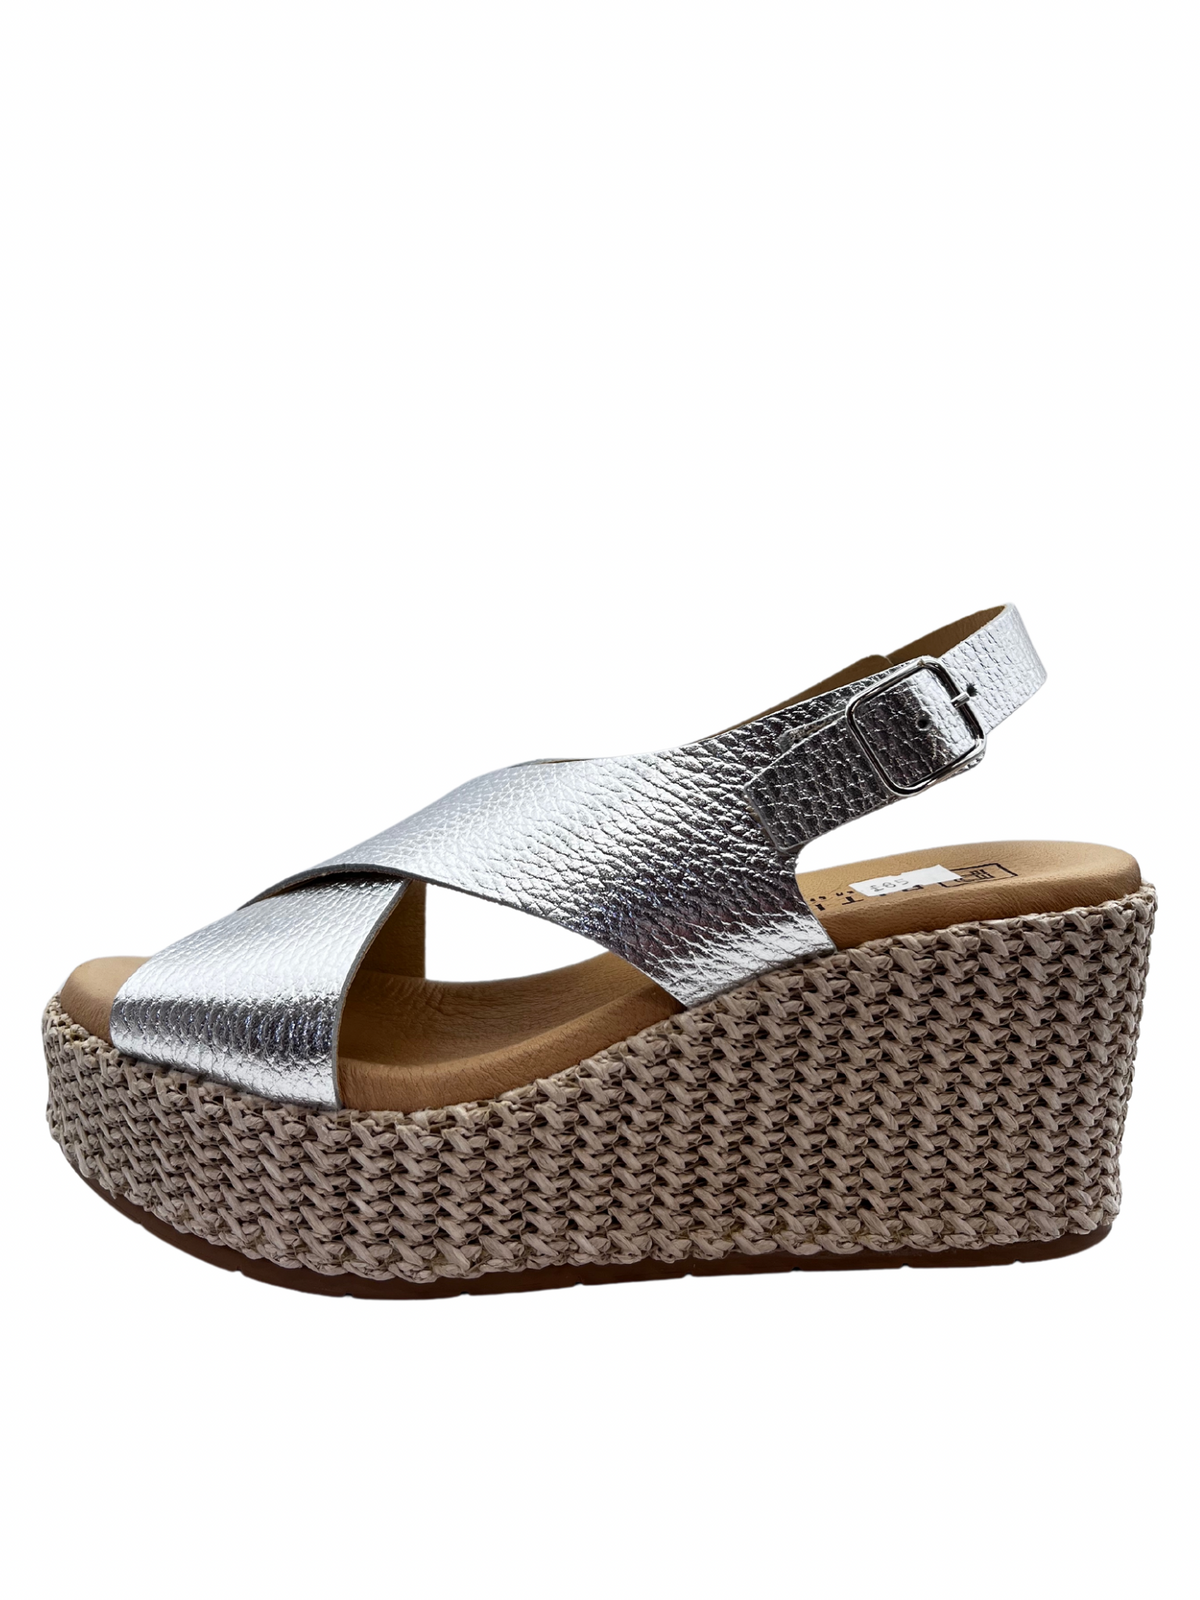 Pitillos Silver Leather Crossover Wedge Sandals